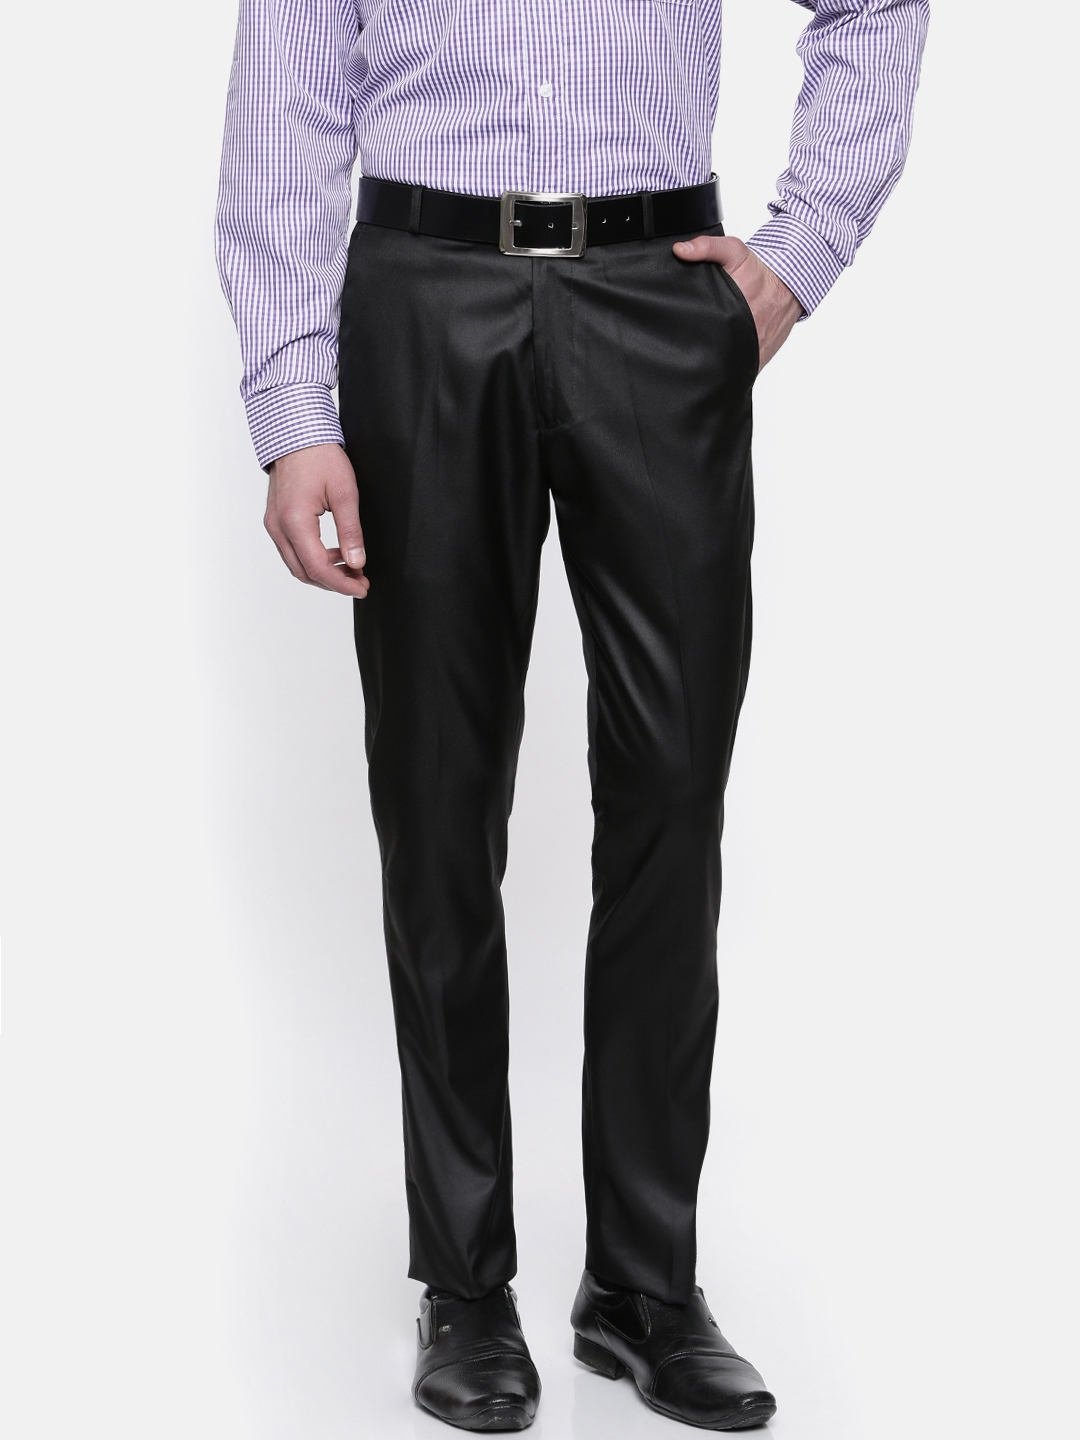 Solid Mens Formal Wear Cotton Trousers